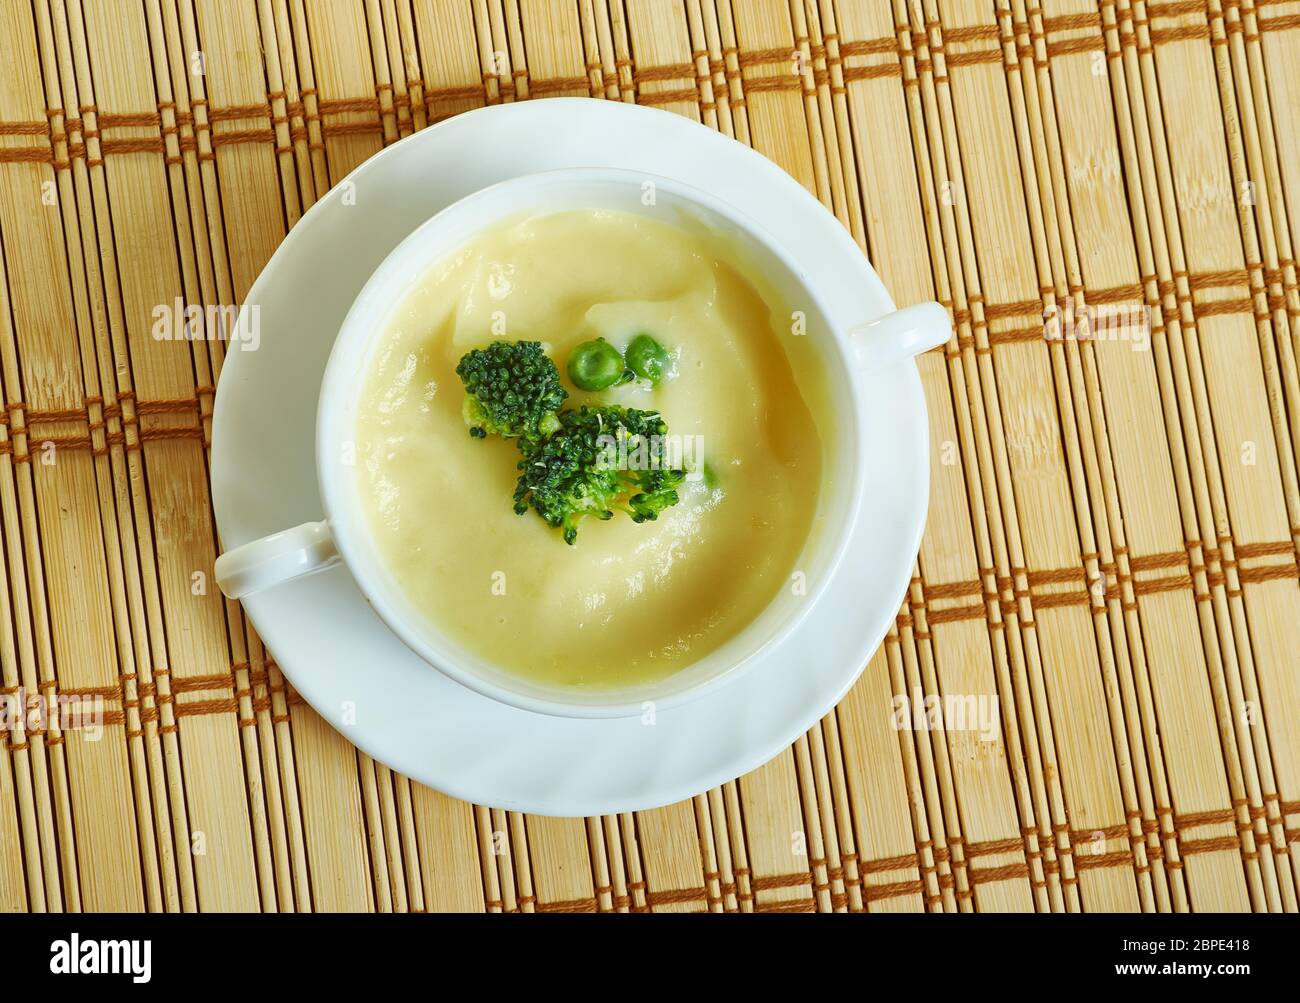 Celeriac soup, vegetable stock and bring the soup Stock Photo